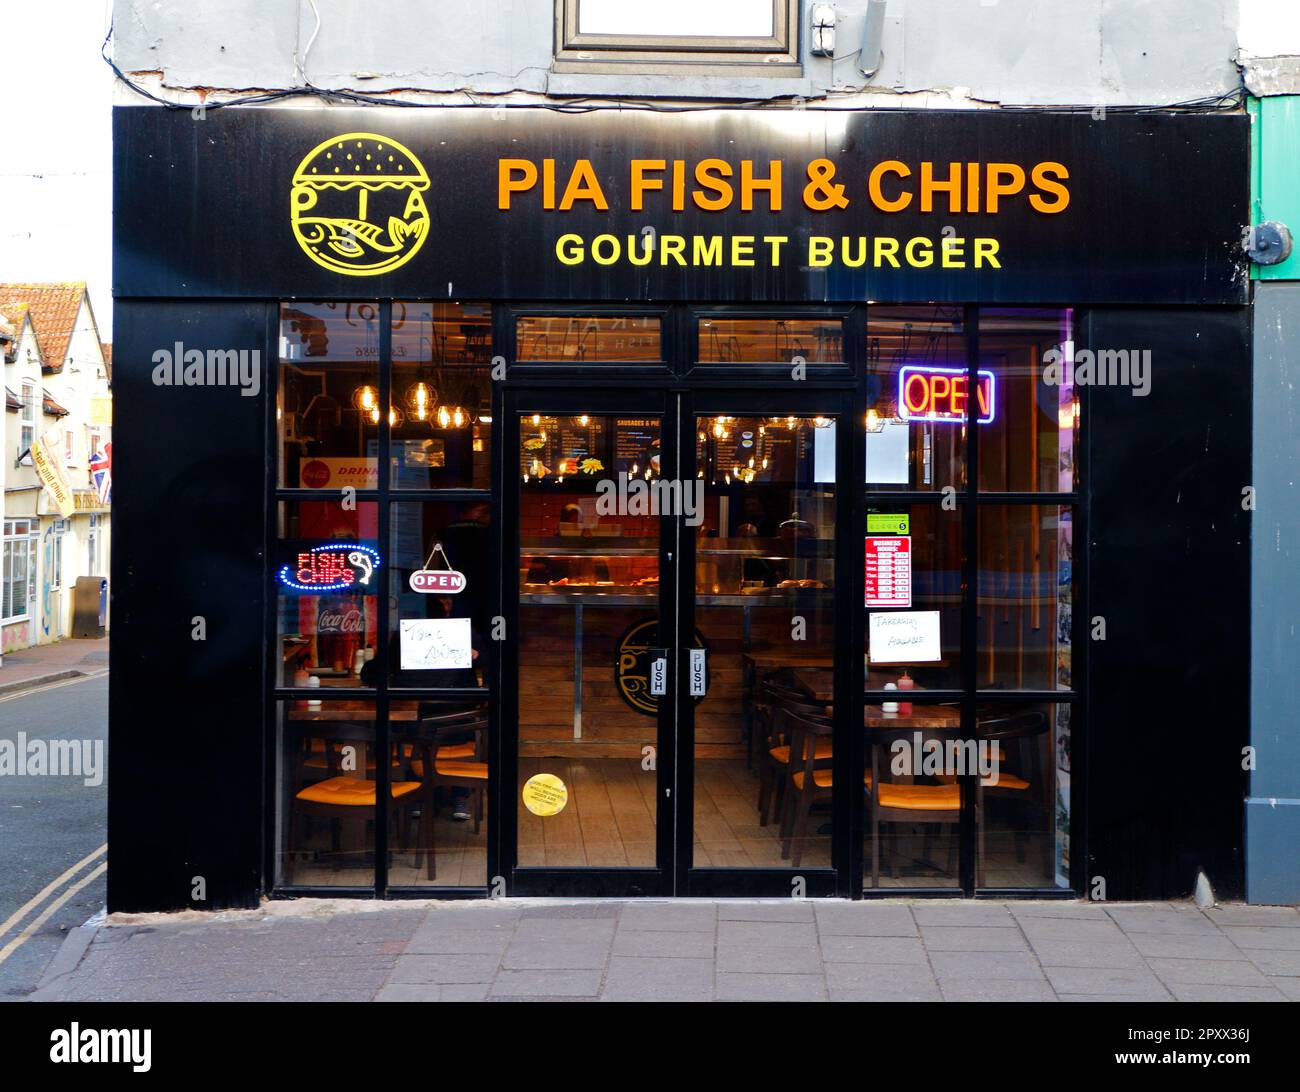 A view of the Pia Fish and Chips and Gourmet Burger shop in the North Norfolk seaside resort of Sheringham, Norfolk, England, United Kingdom. Stock Photo